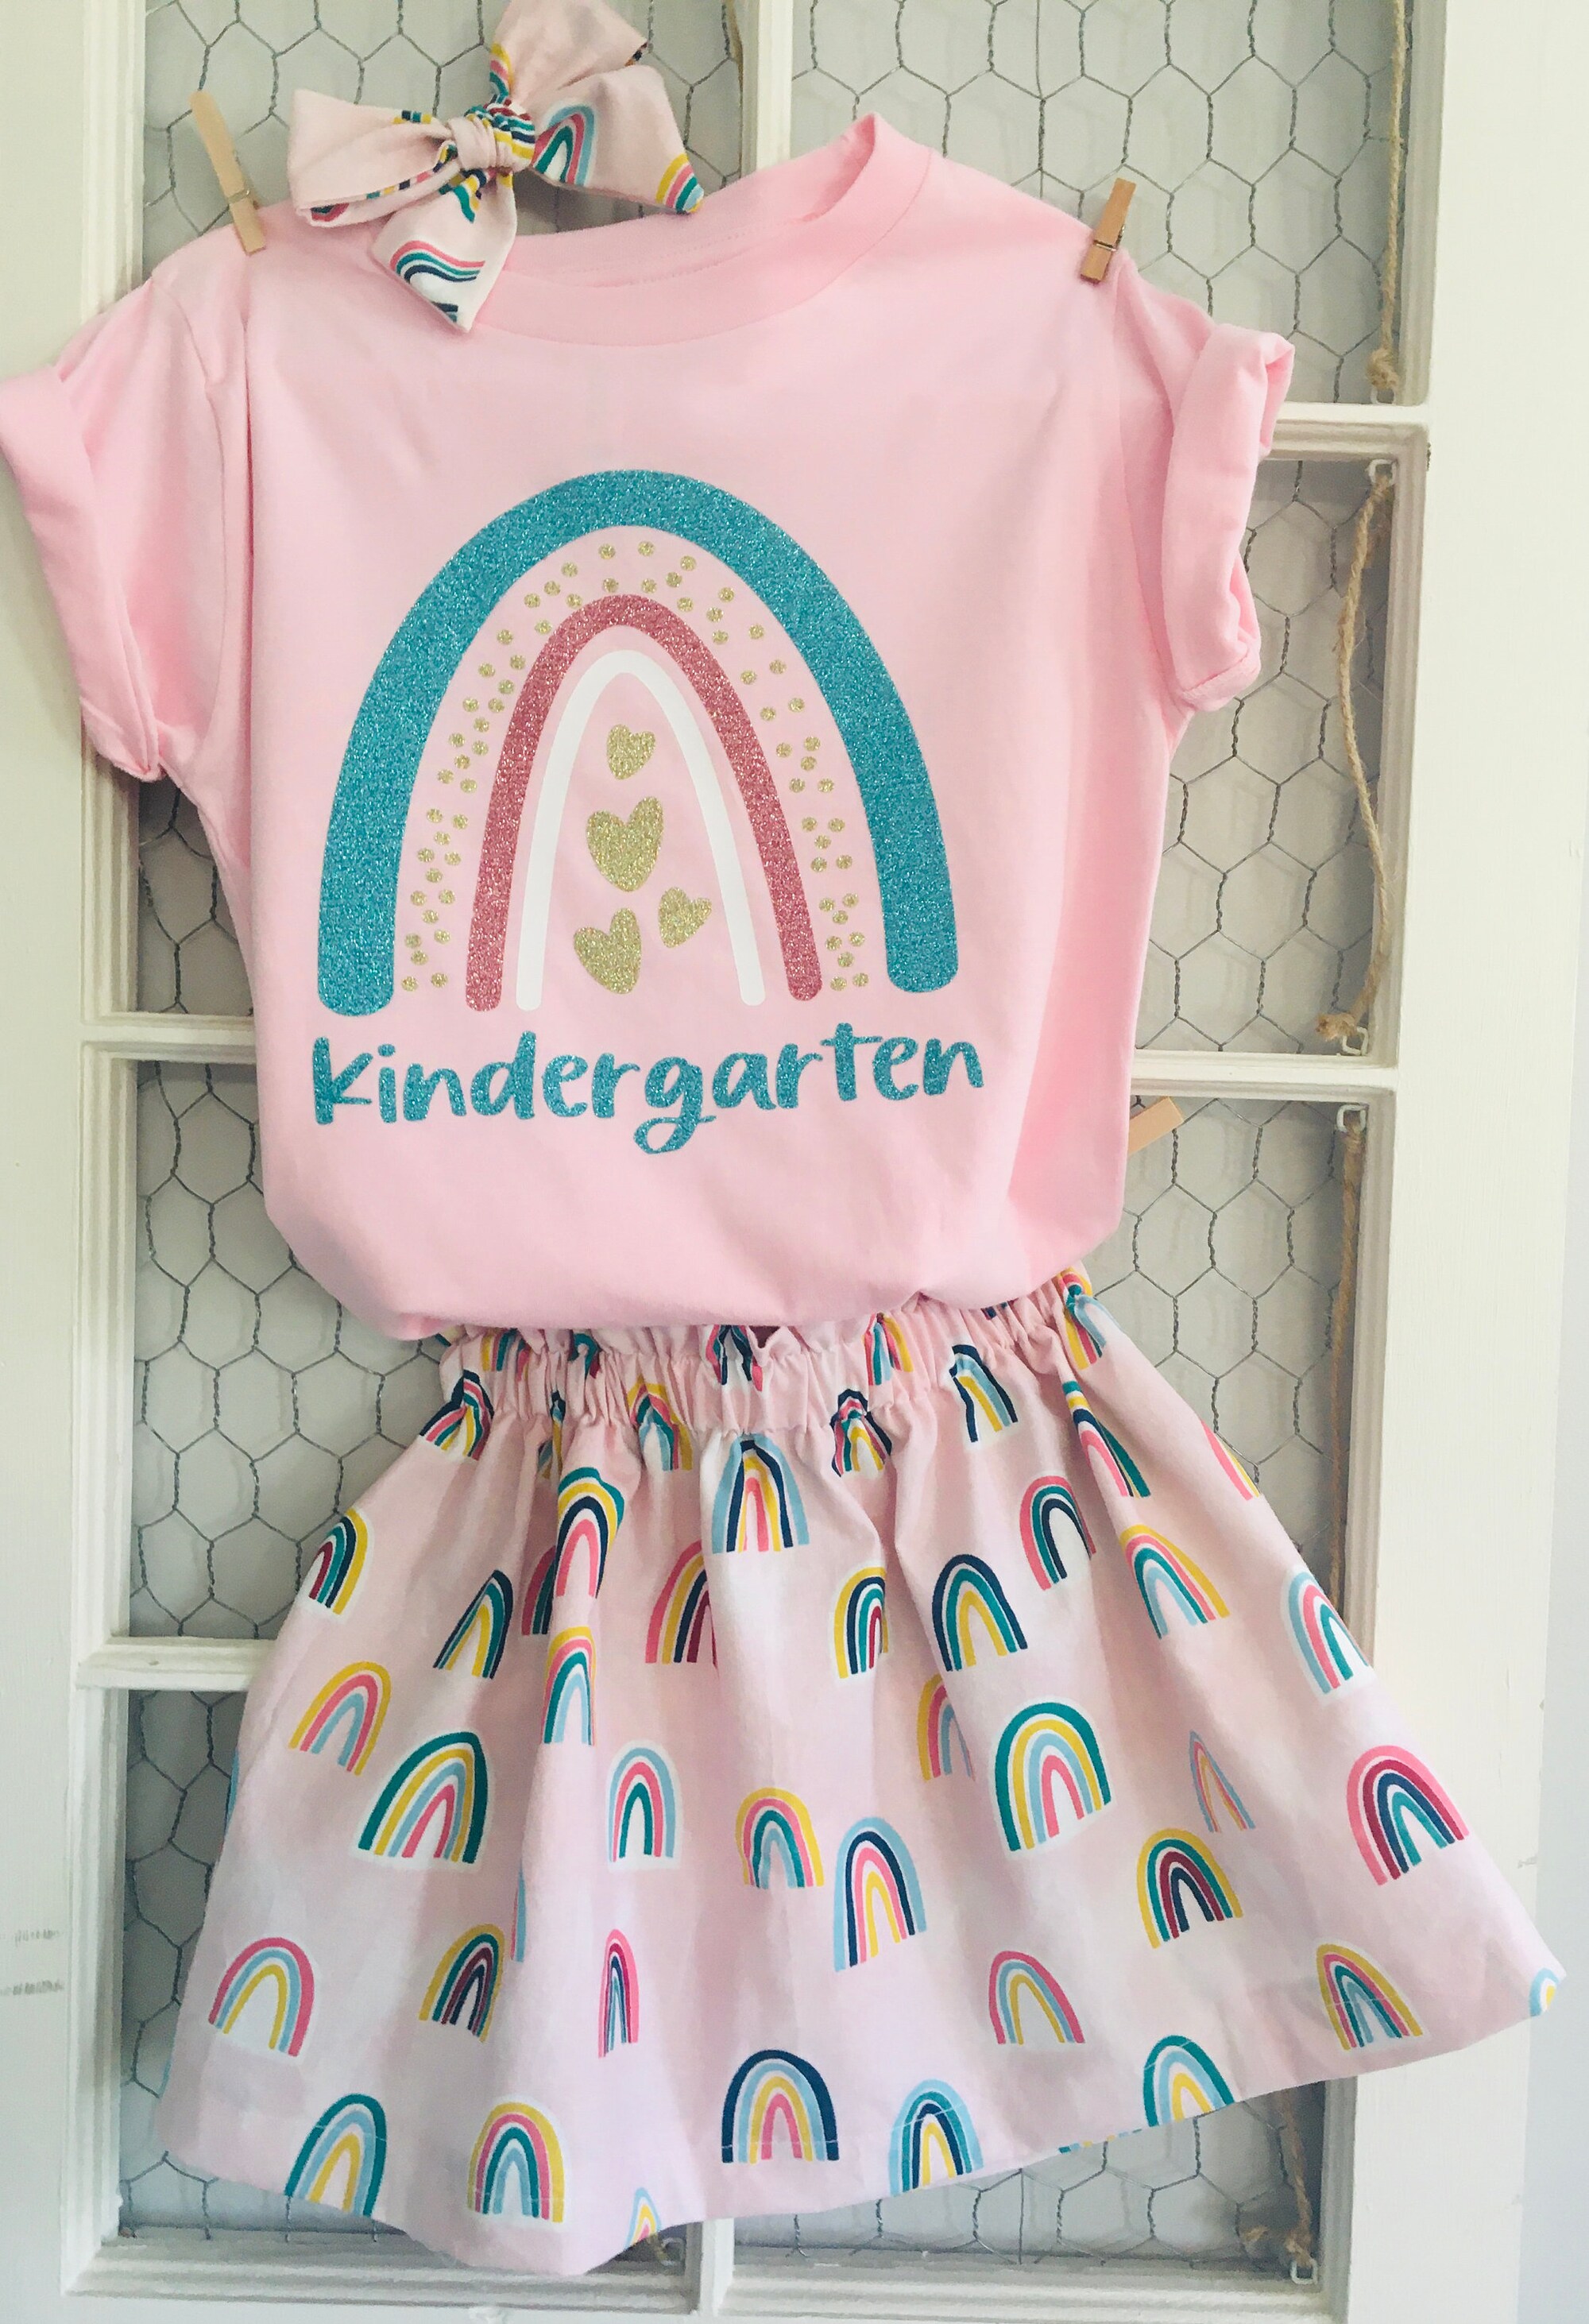 Kindergarten outfit, back to school, girls school outfit, first day of school